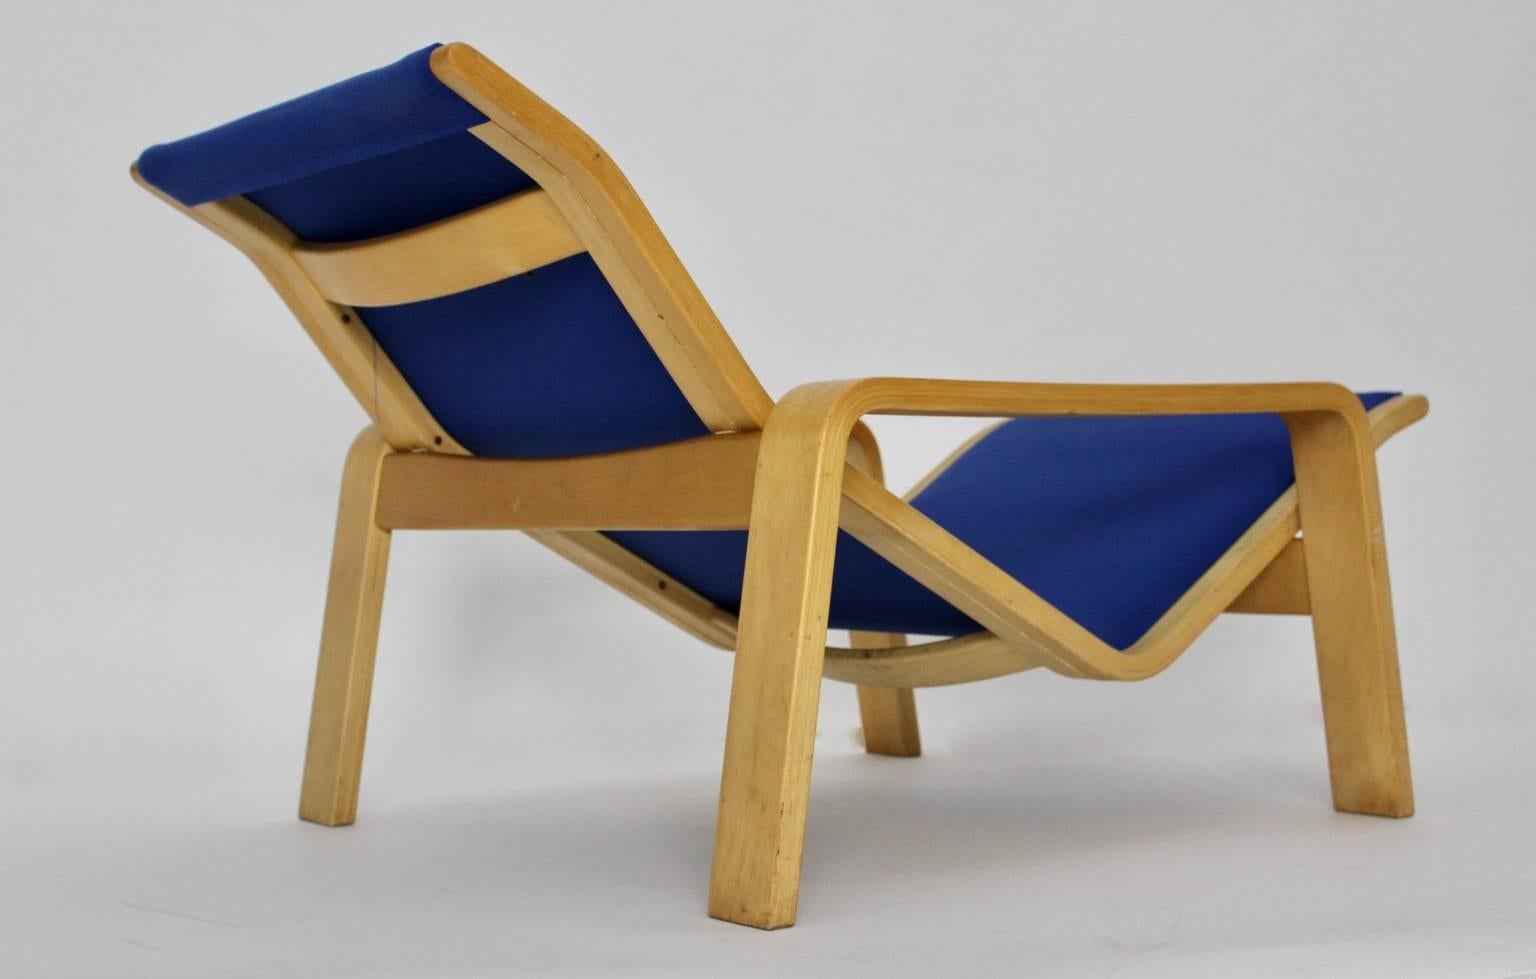 Blue Scandinavian Modern vintage chaise longue or lounge chair model Pulkka from birch by Ilmari Lappalainen, 1963, Finland for Asko Finland.
The frame of the chaise longue from natural lacquered birch plywood, while the removable seat is covered